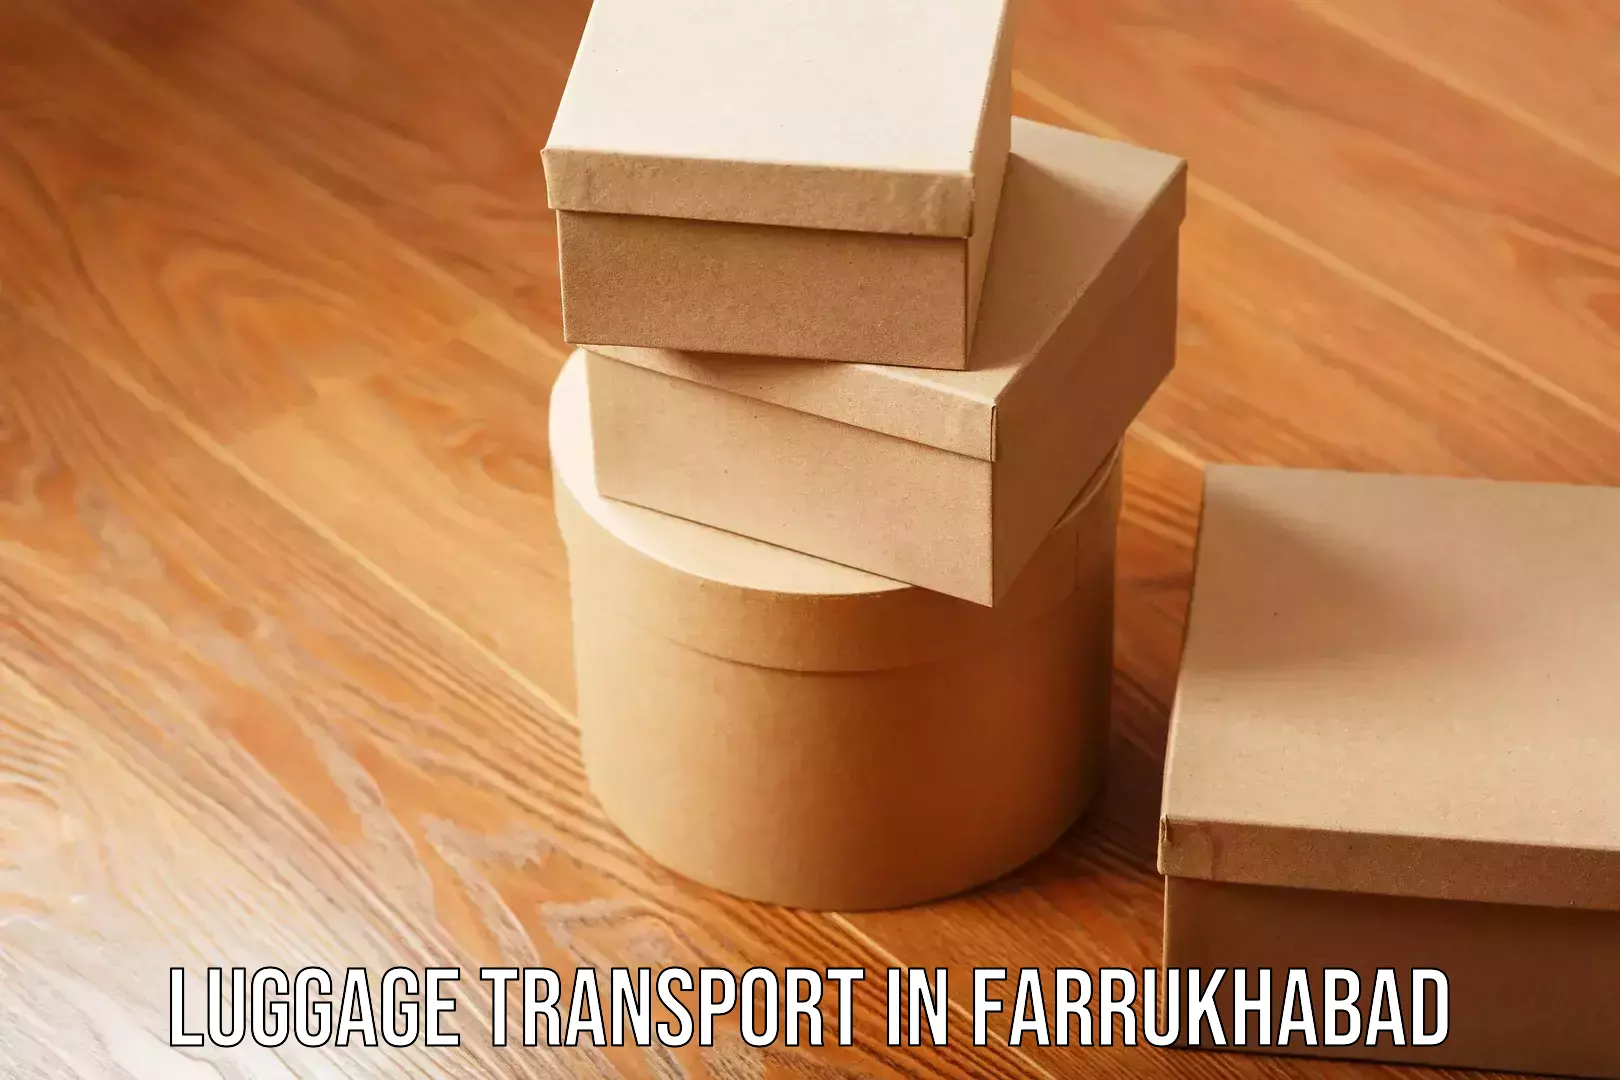 Baggage transport technology in Farrukhabad